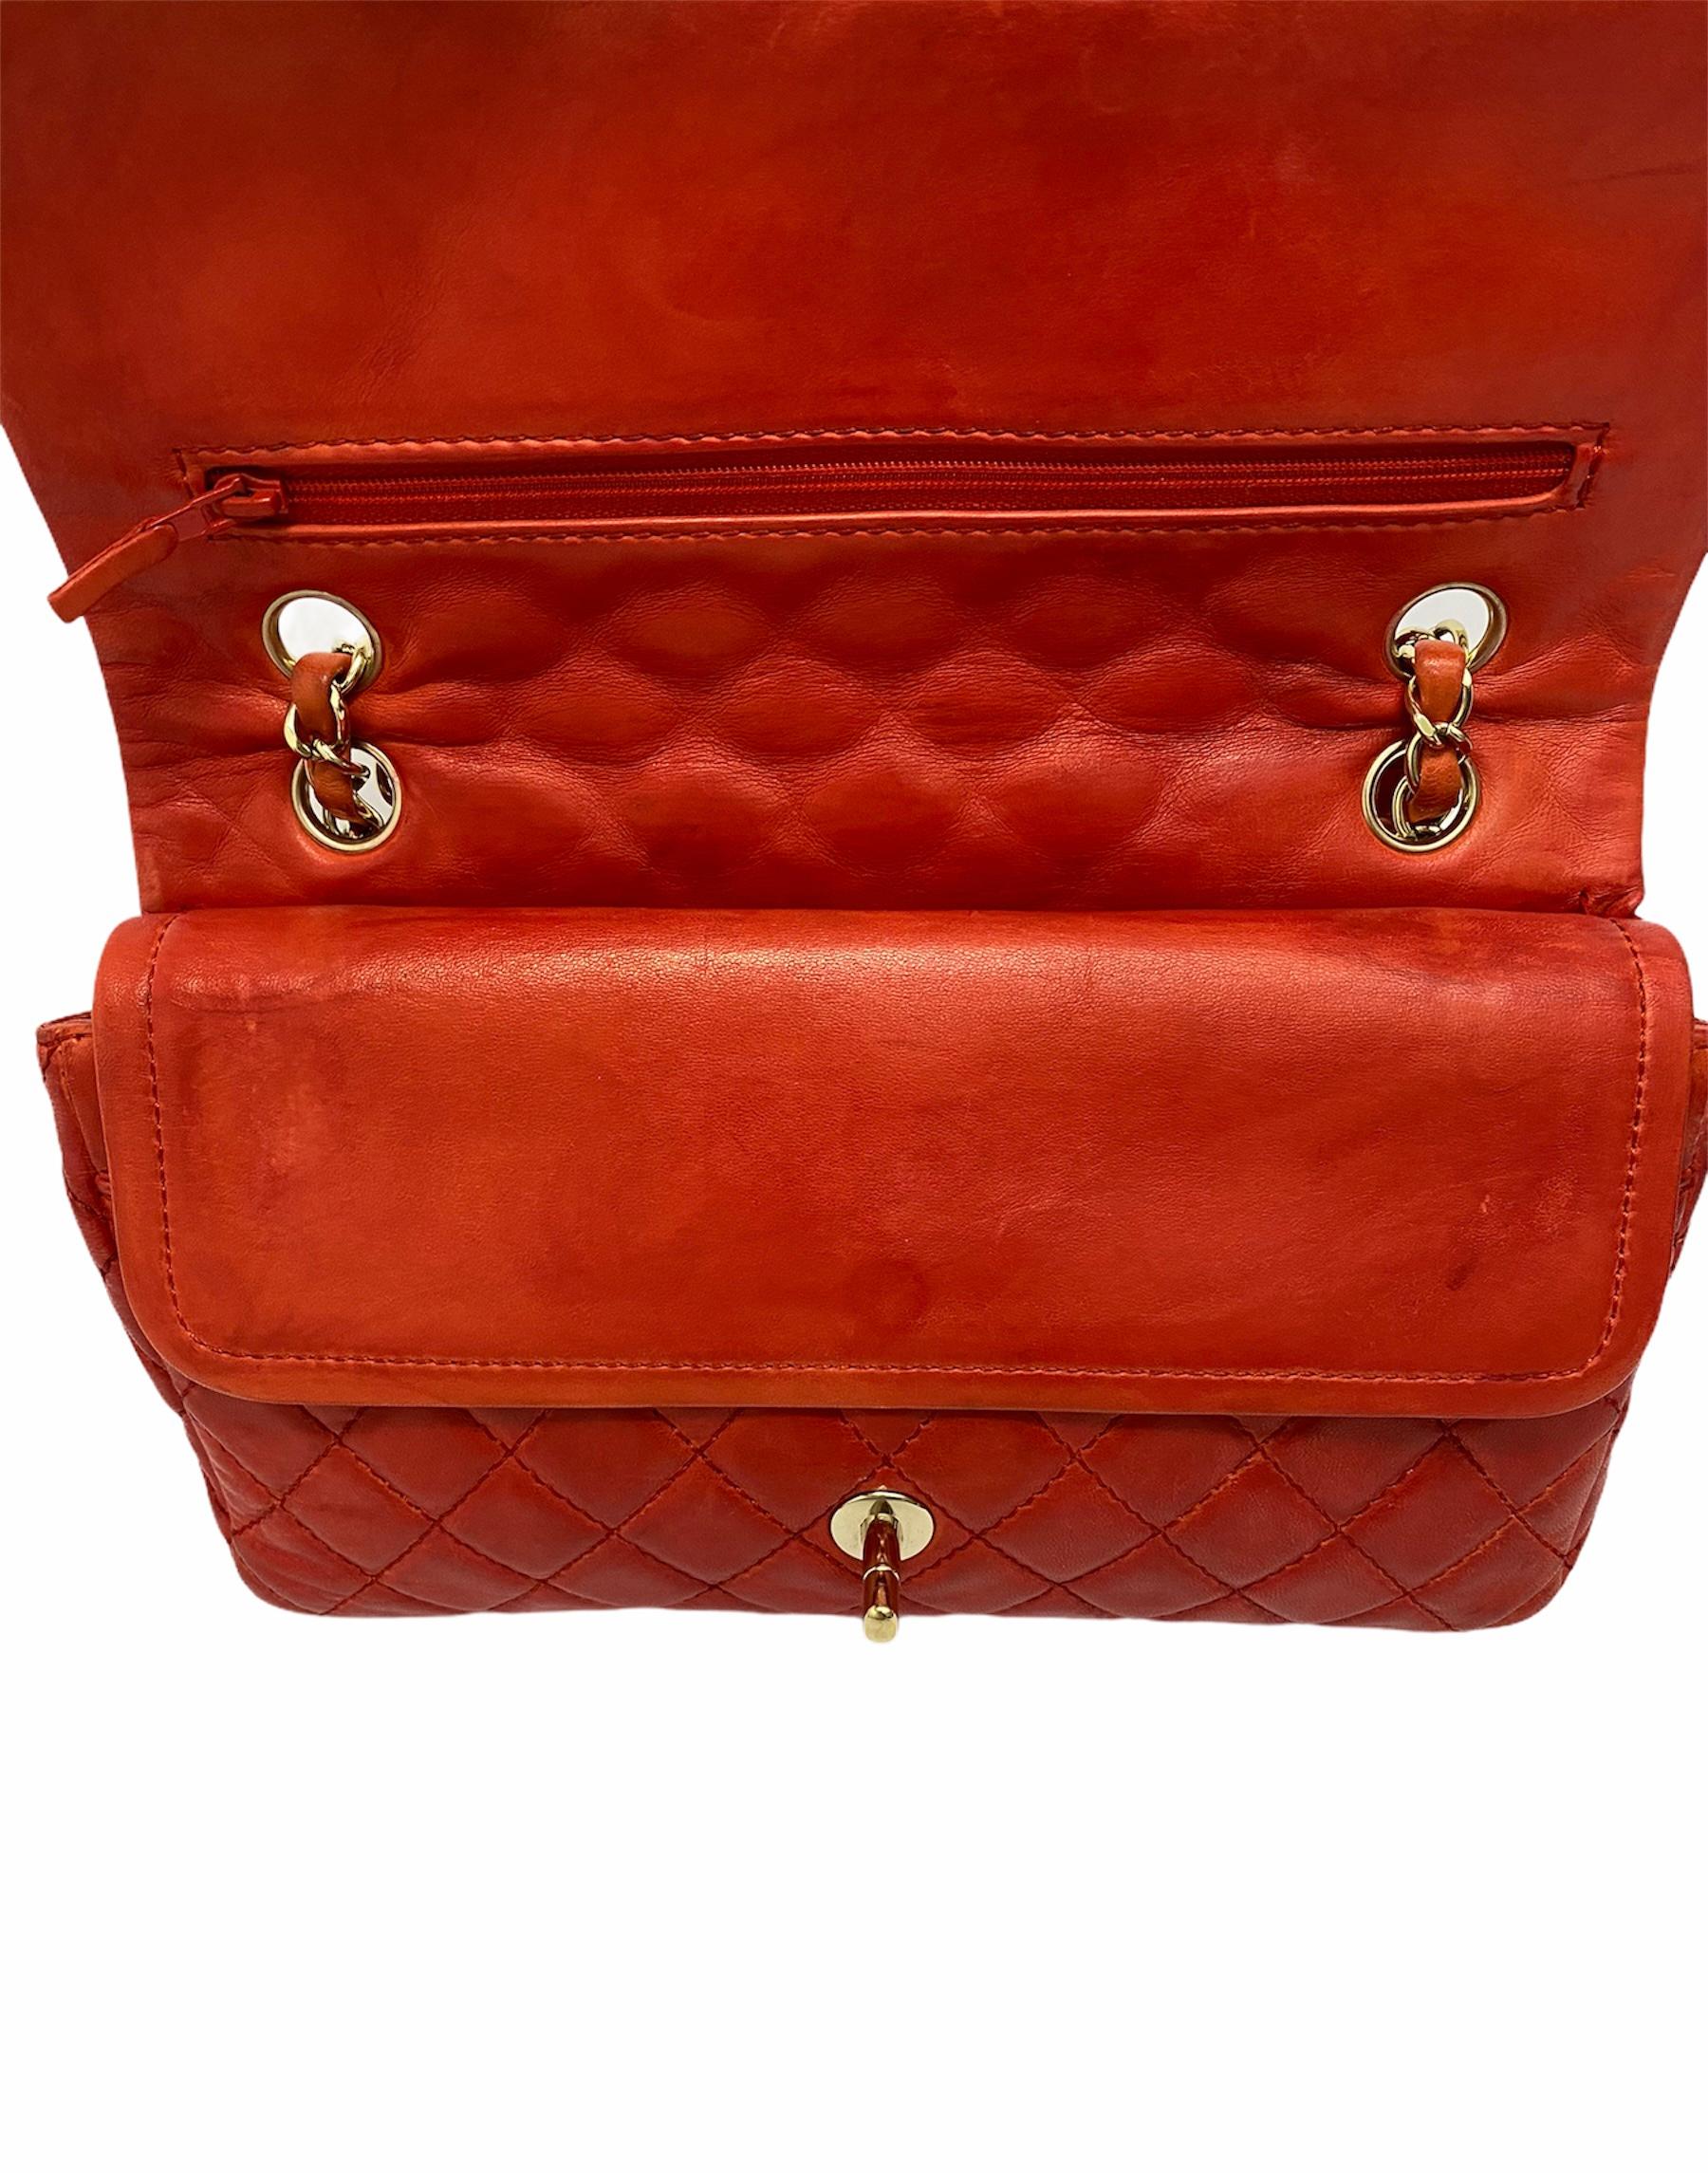 Chanel 2.55 Red Leather with Golden Hardware 7